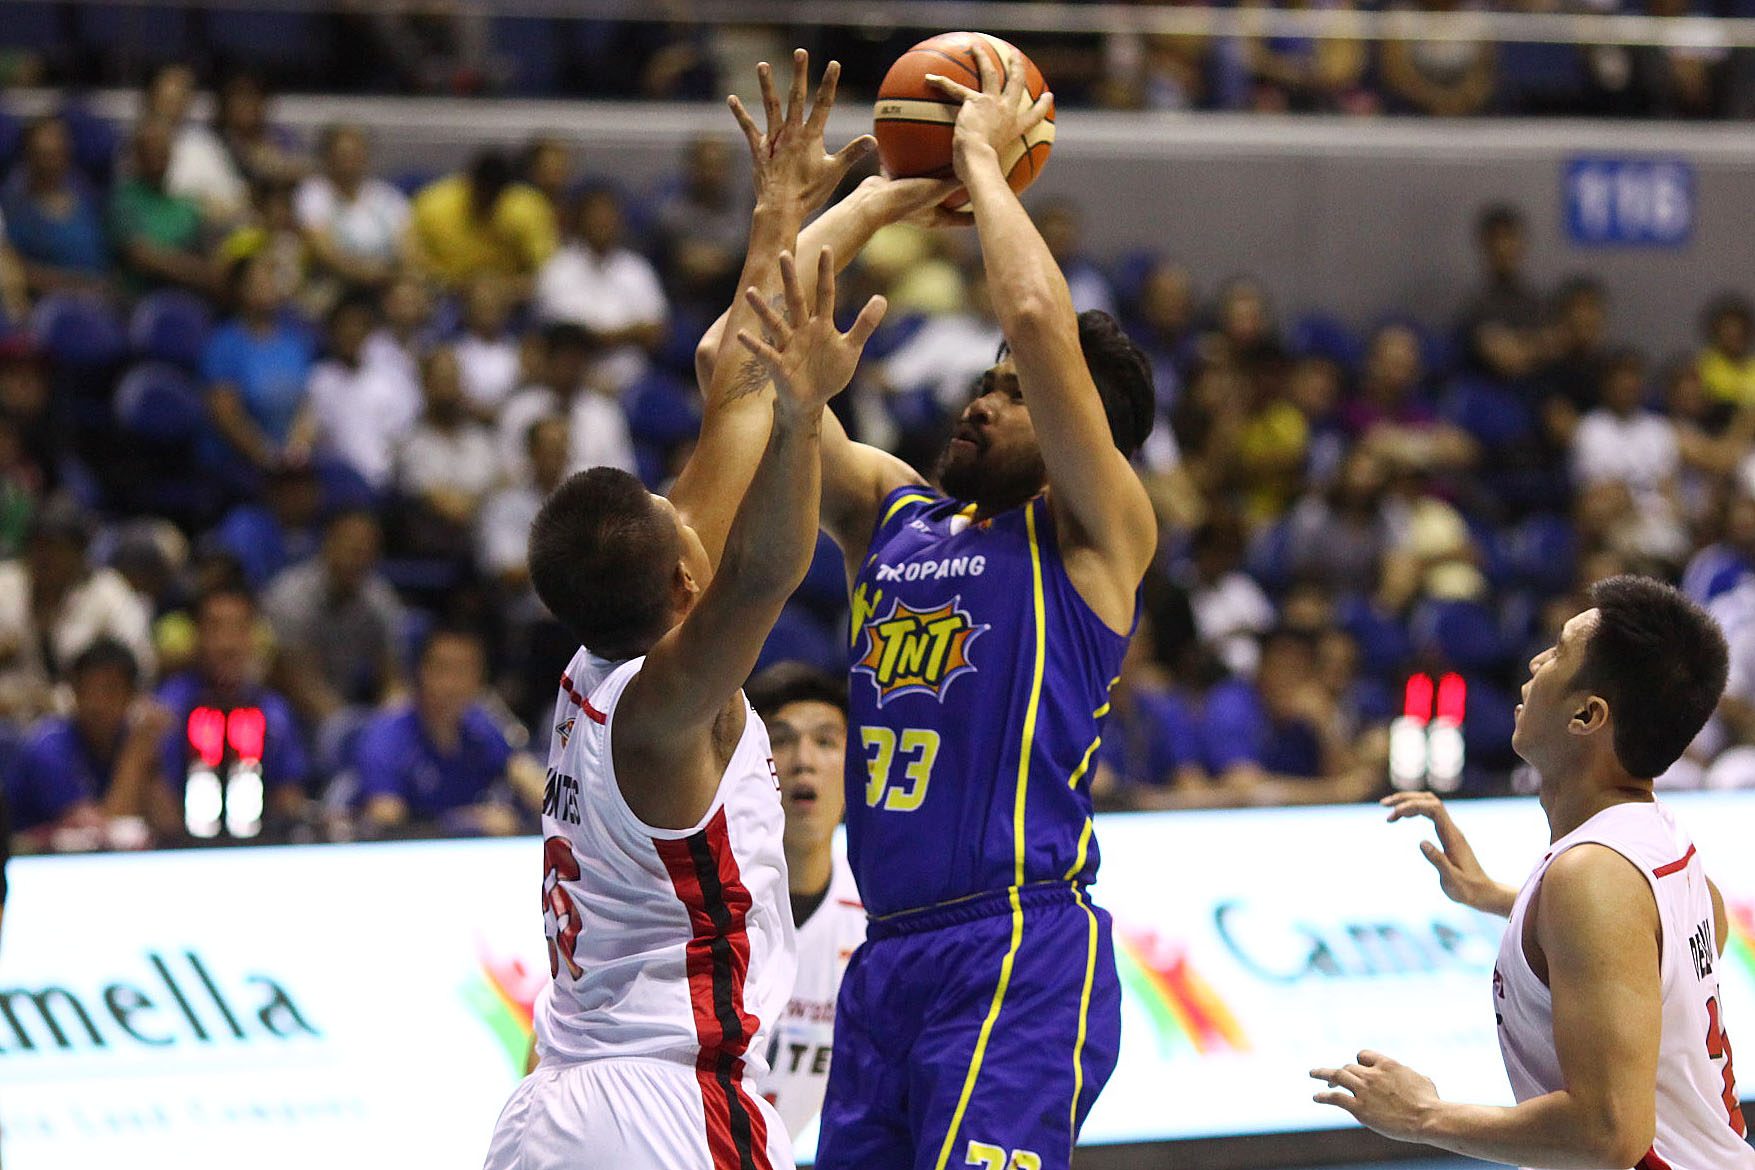 Missing basketball bad, De Ocampo comes back strong for TNT